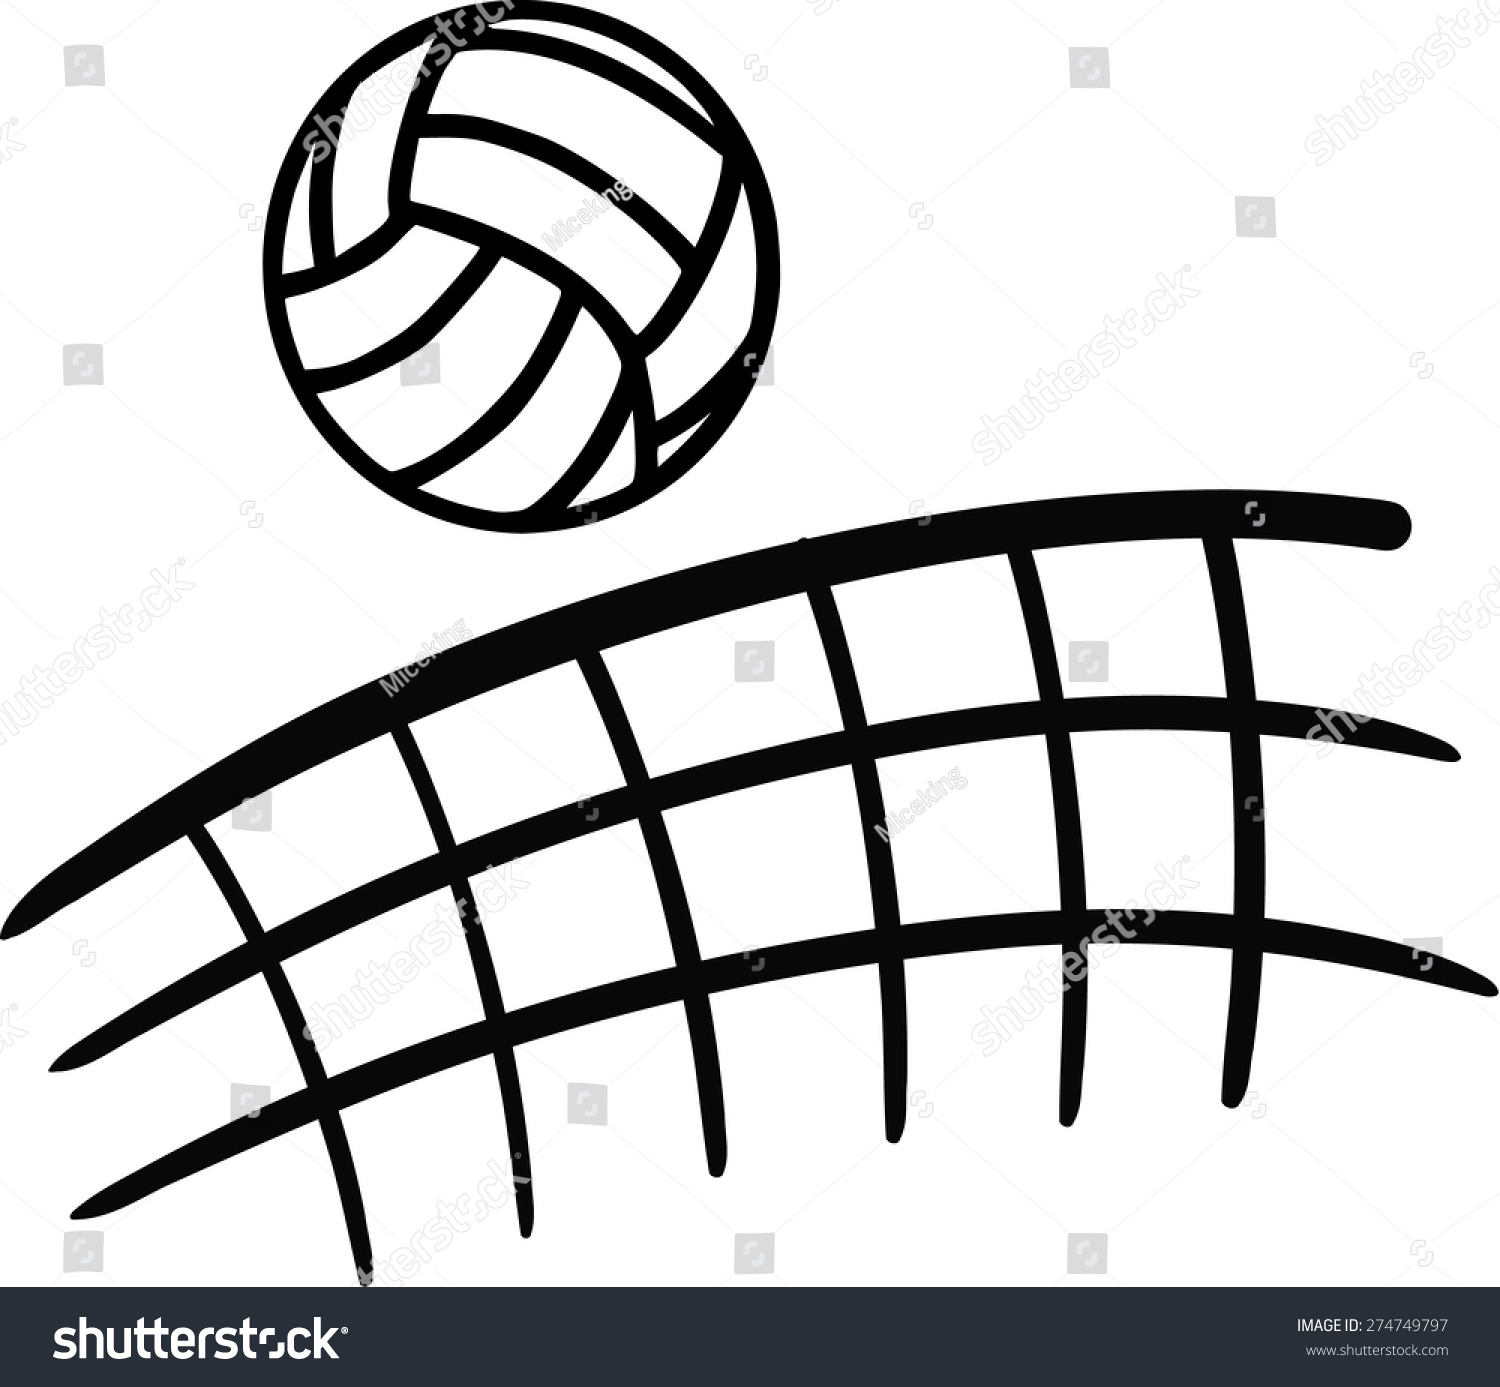 volleyball net clipart free - photo #47